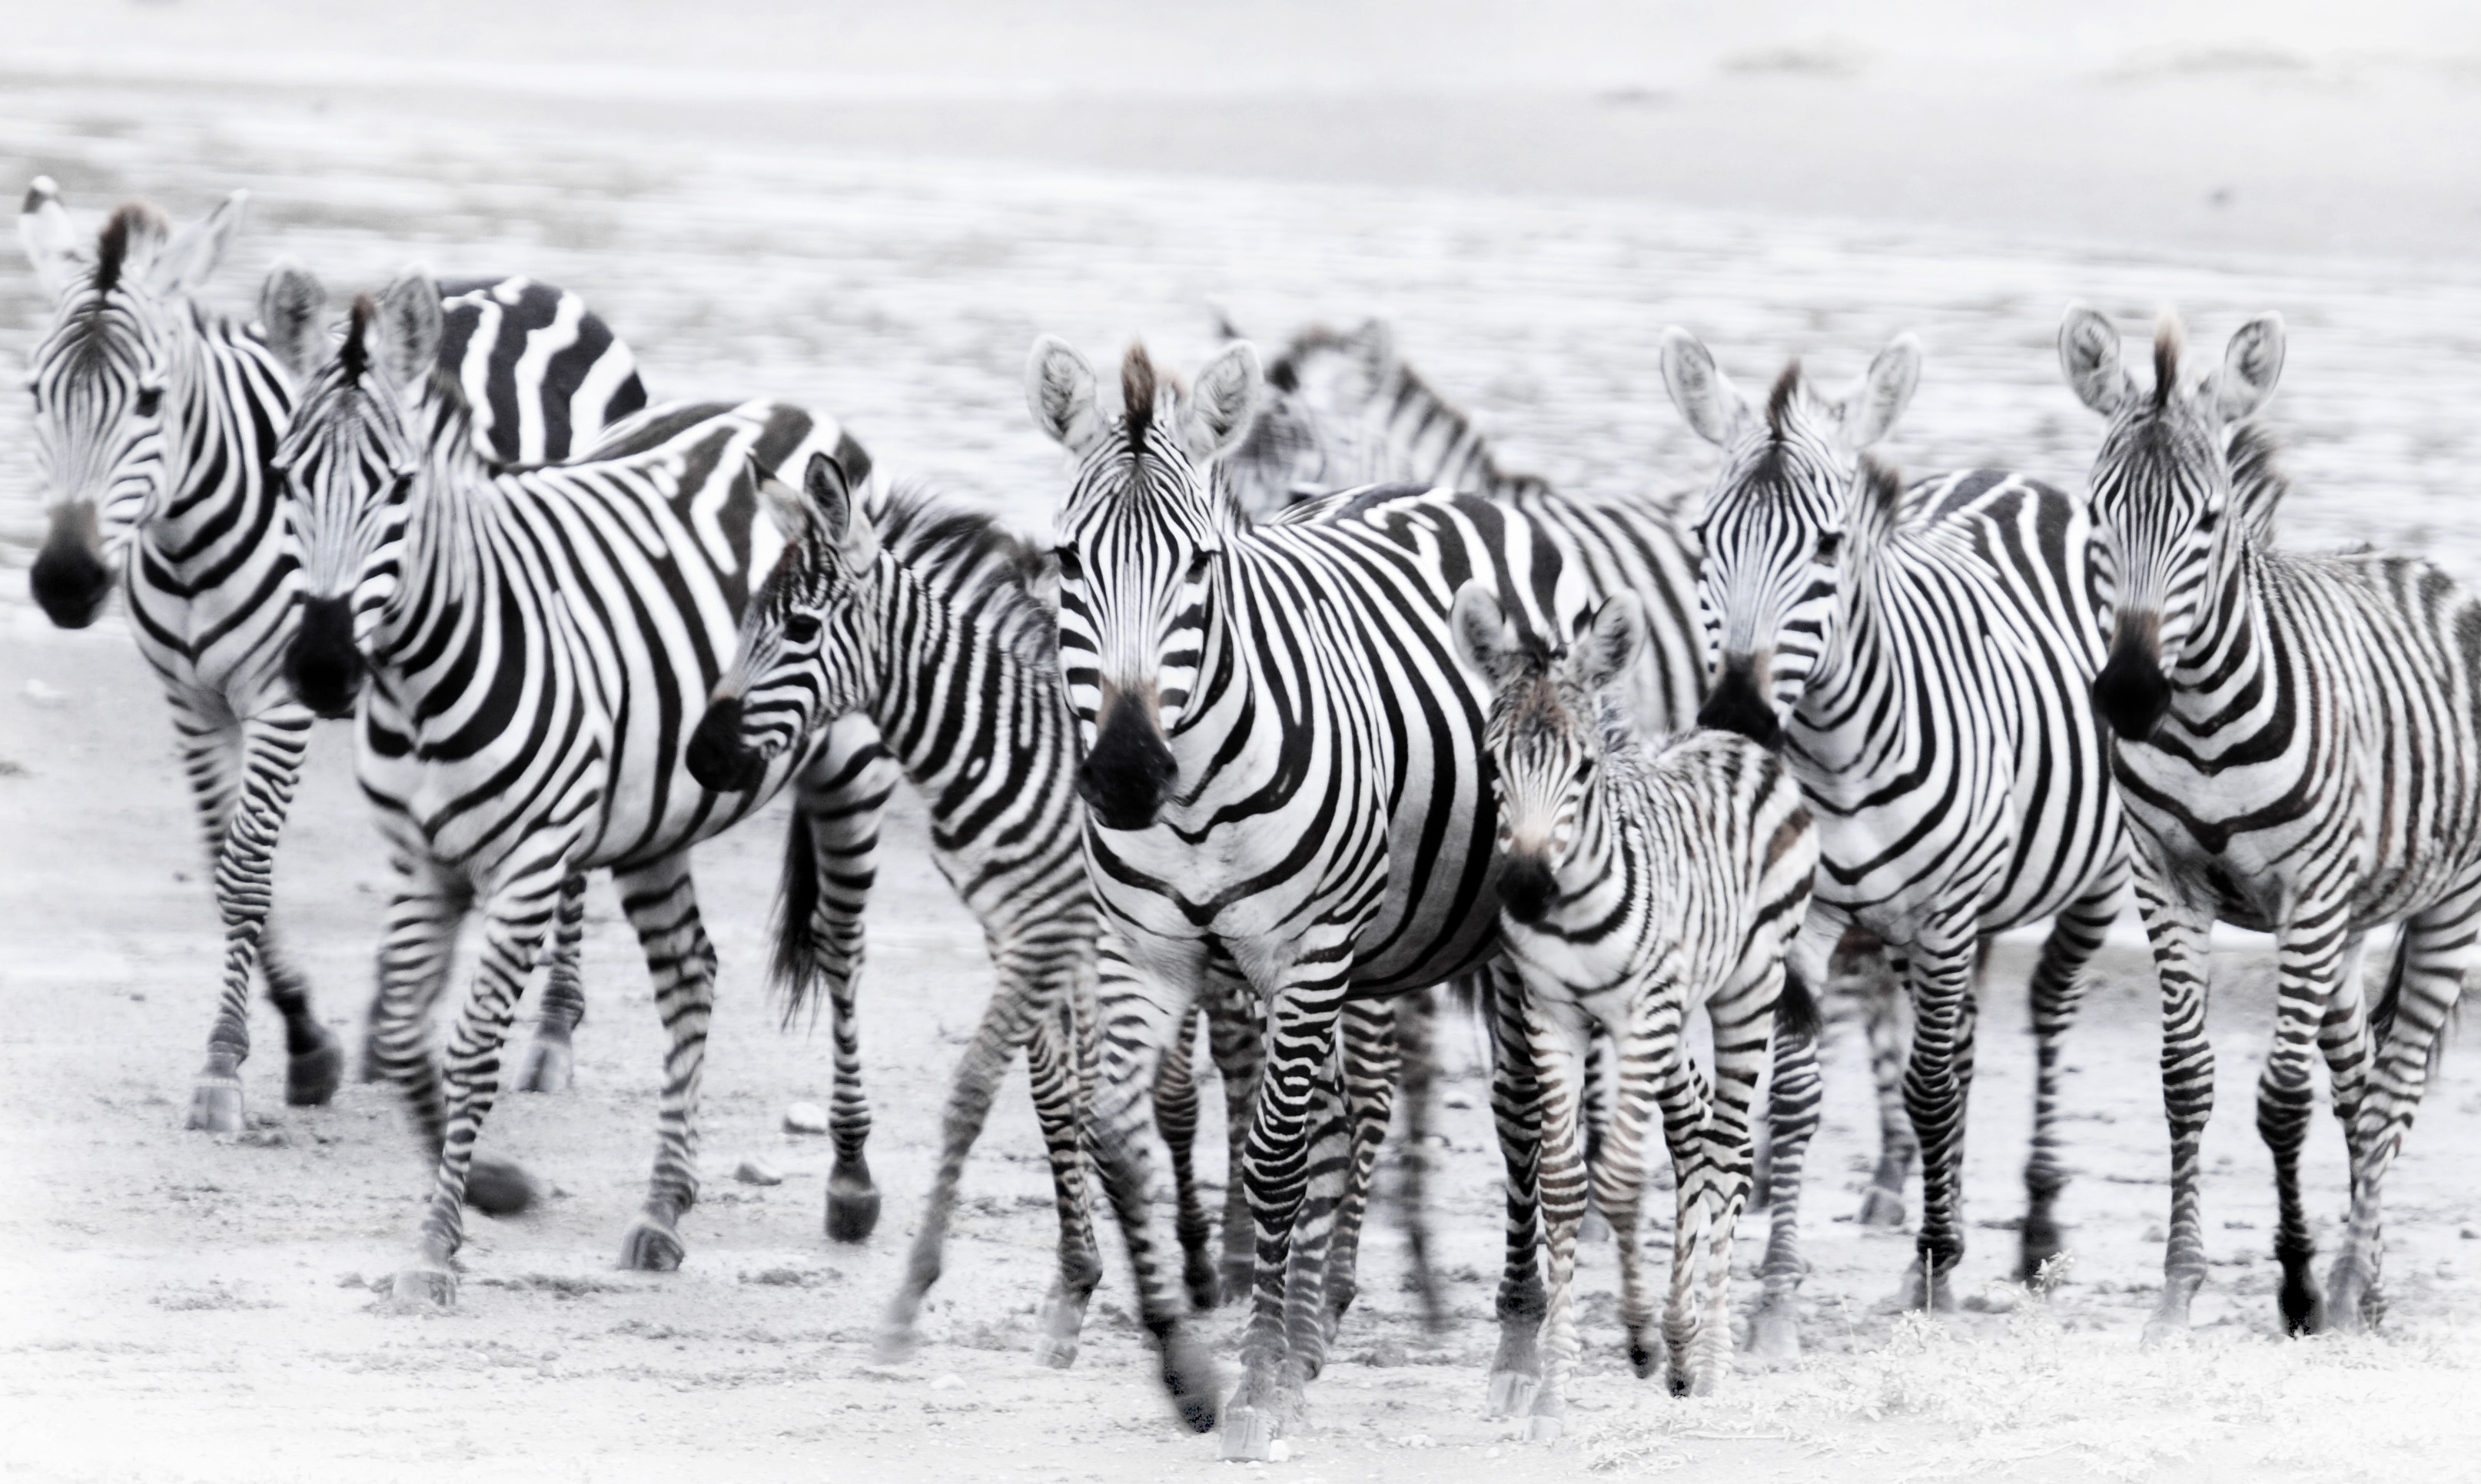 The spacing between the black and white stripes of the zebra tend to make it appear white with black stripes.